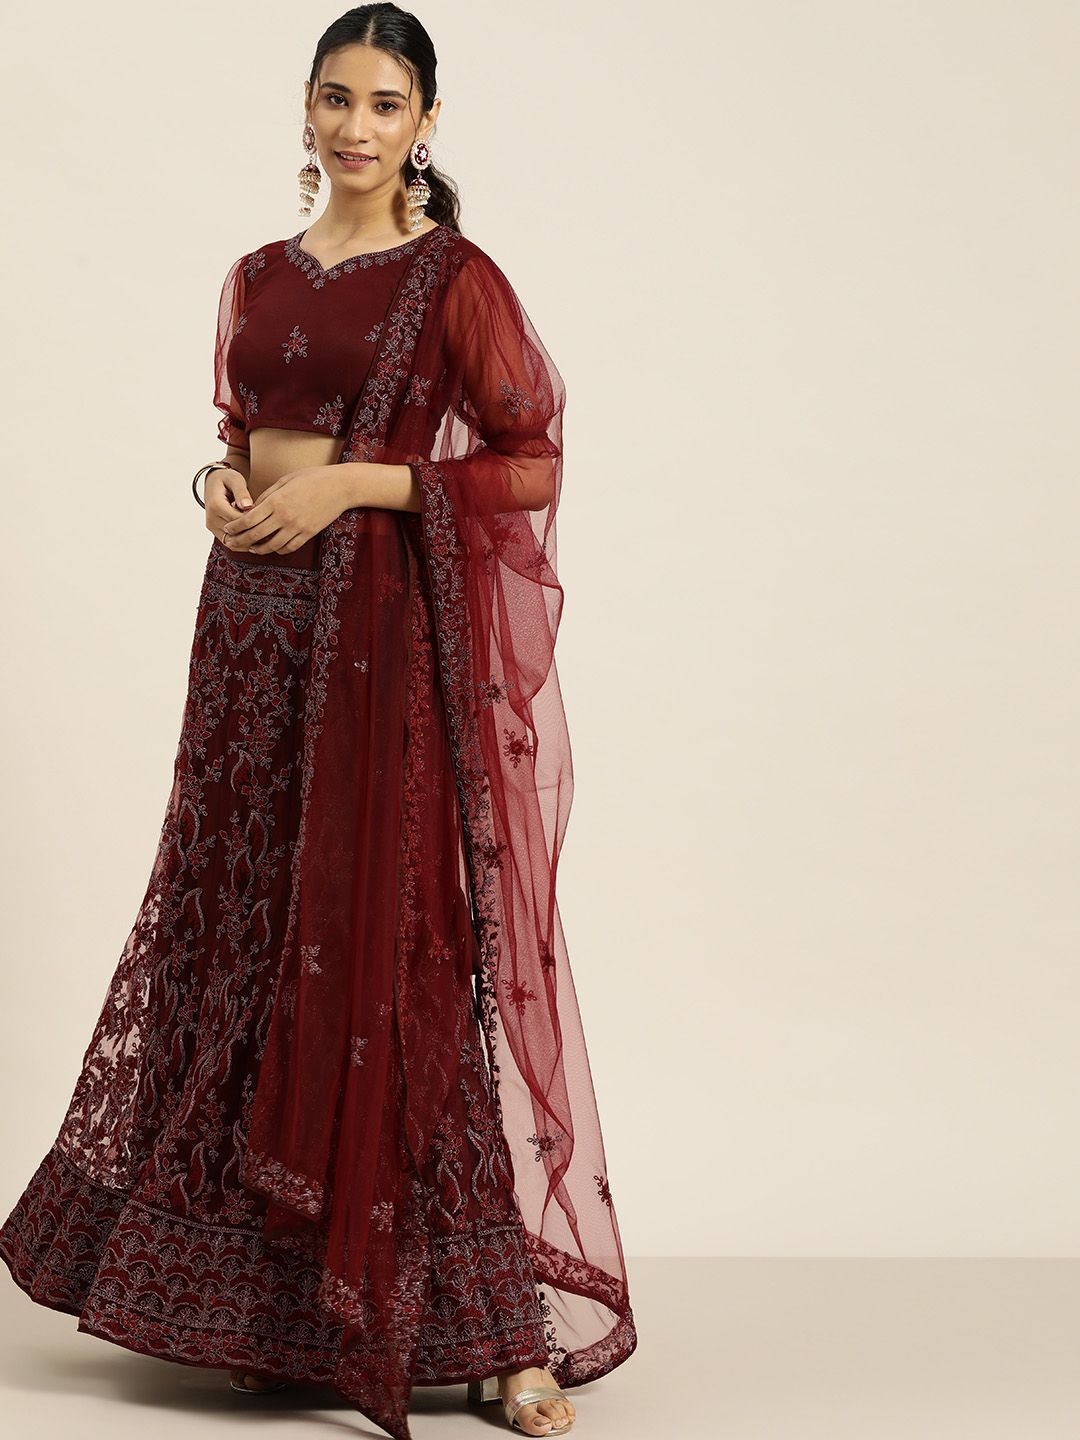 Sangria Maroon Embroidered Beads and Stones Semi-Stitched Lehenga & Unstitched Blouse With Dupatta Price in India